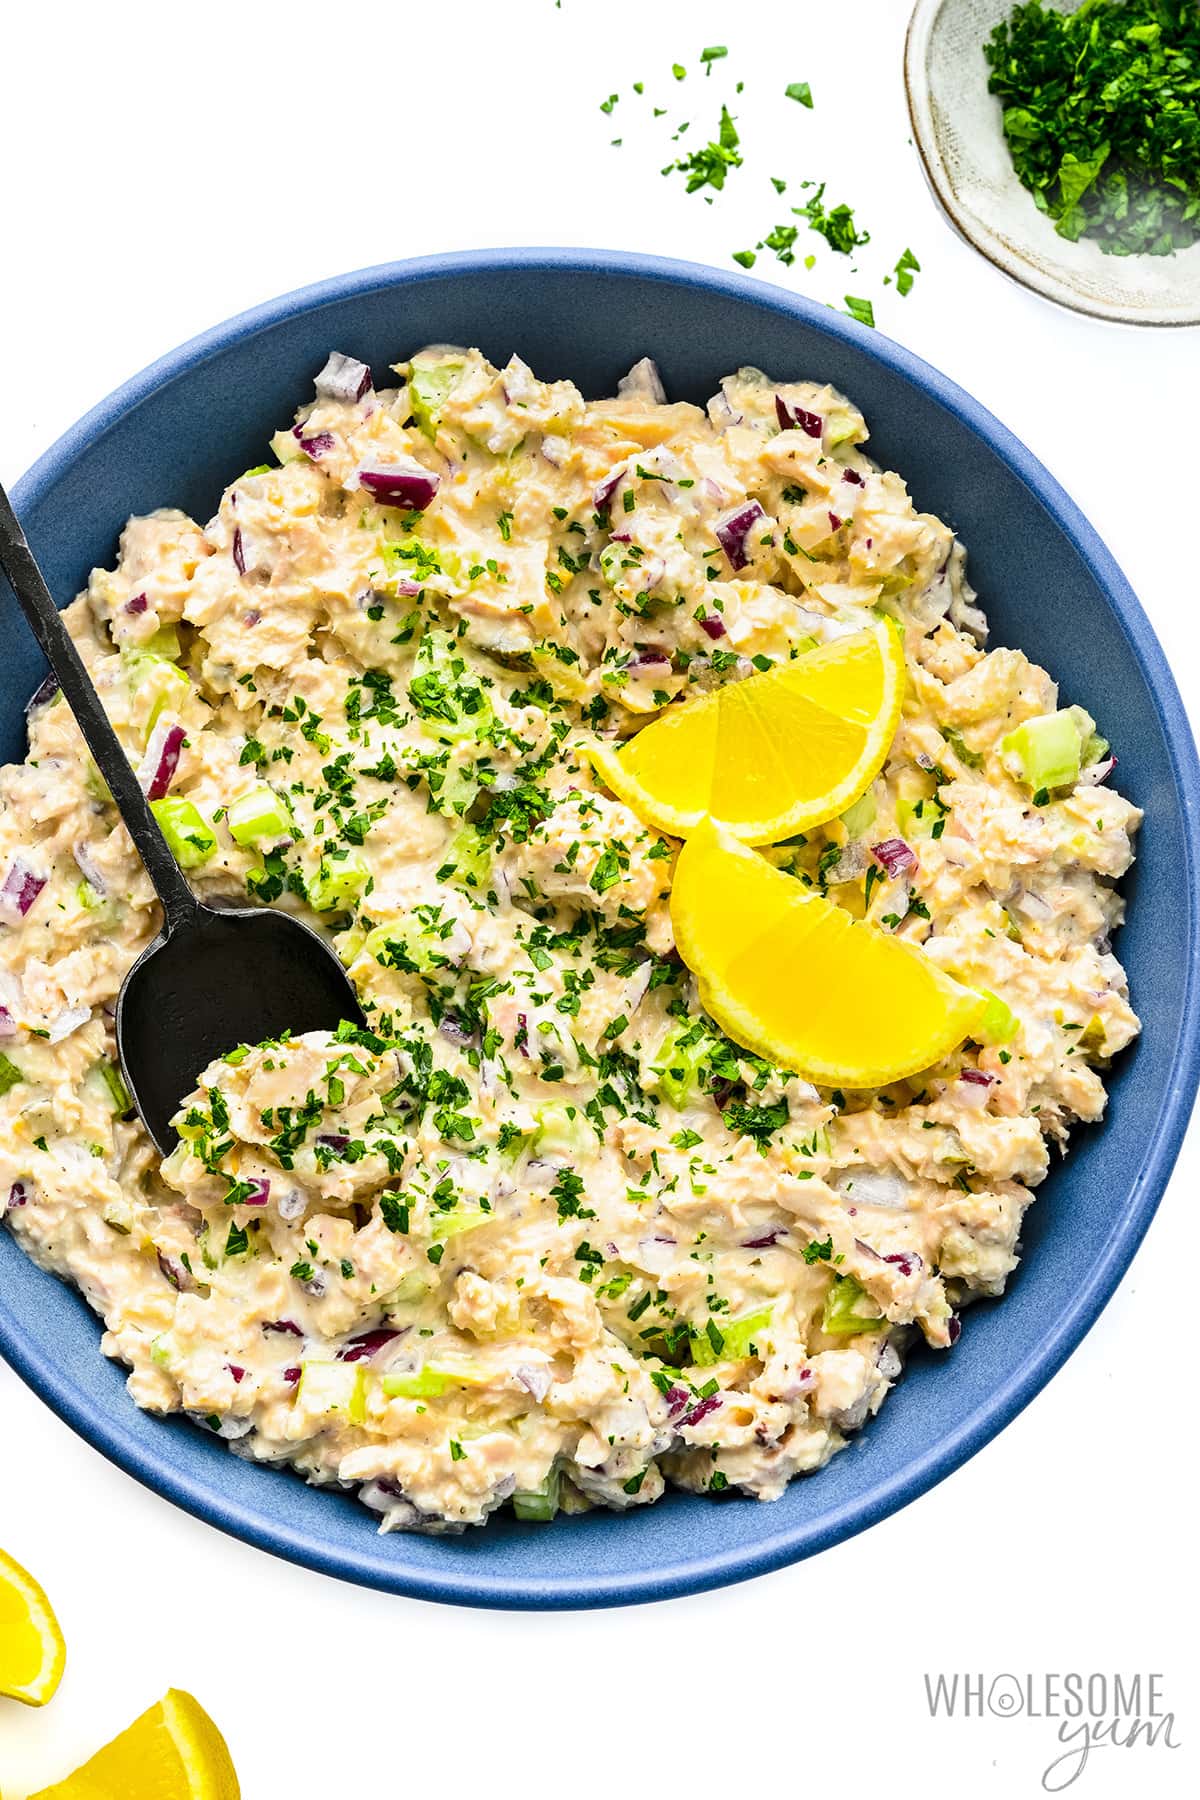 Tuna salad in a bowl with lemon slices and a spoon.